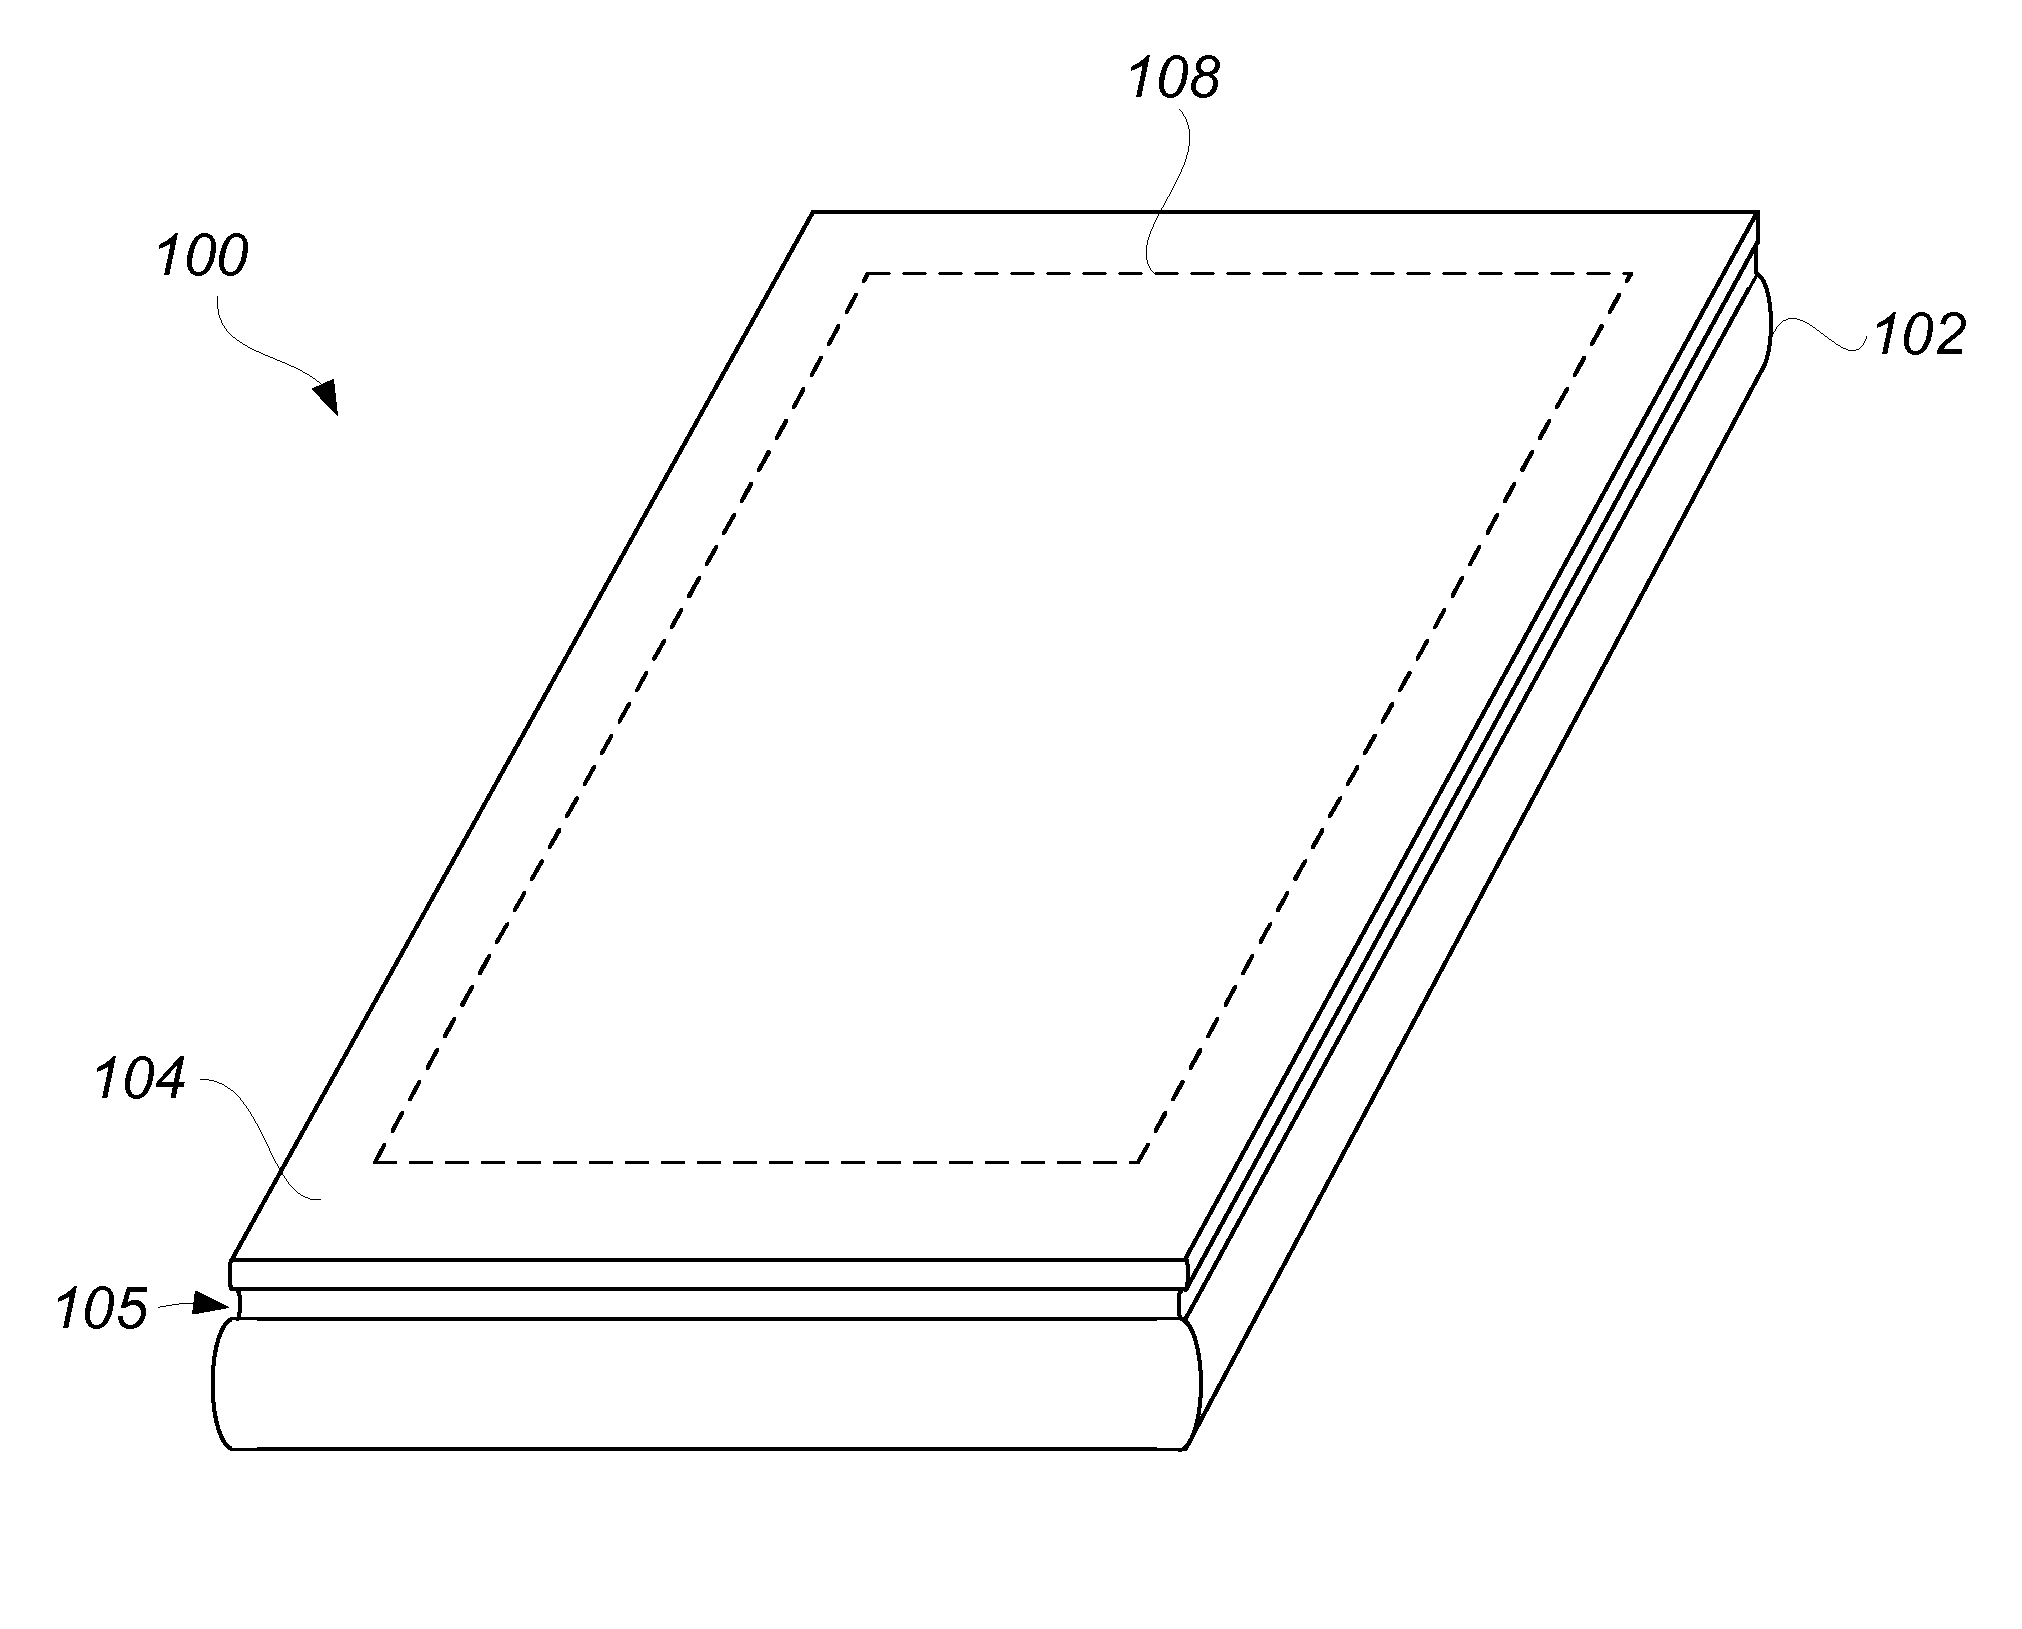 Shock mounting cover glass in consumer electronics devices